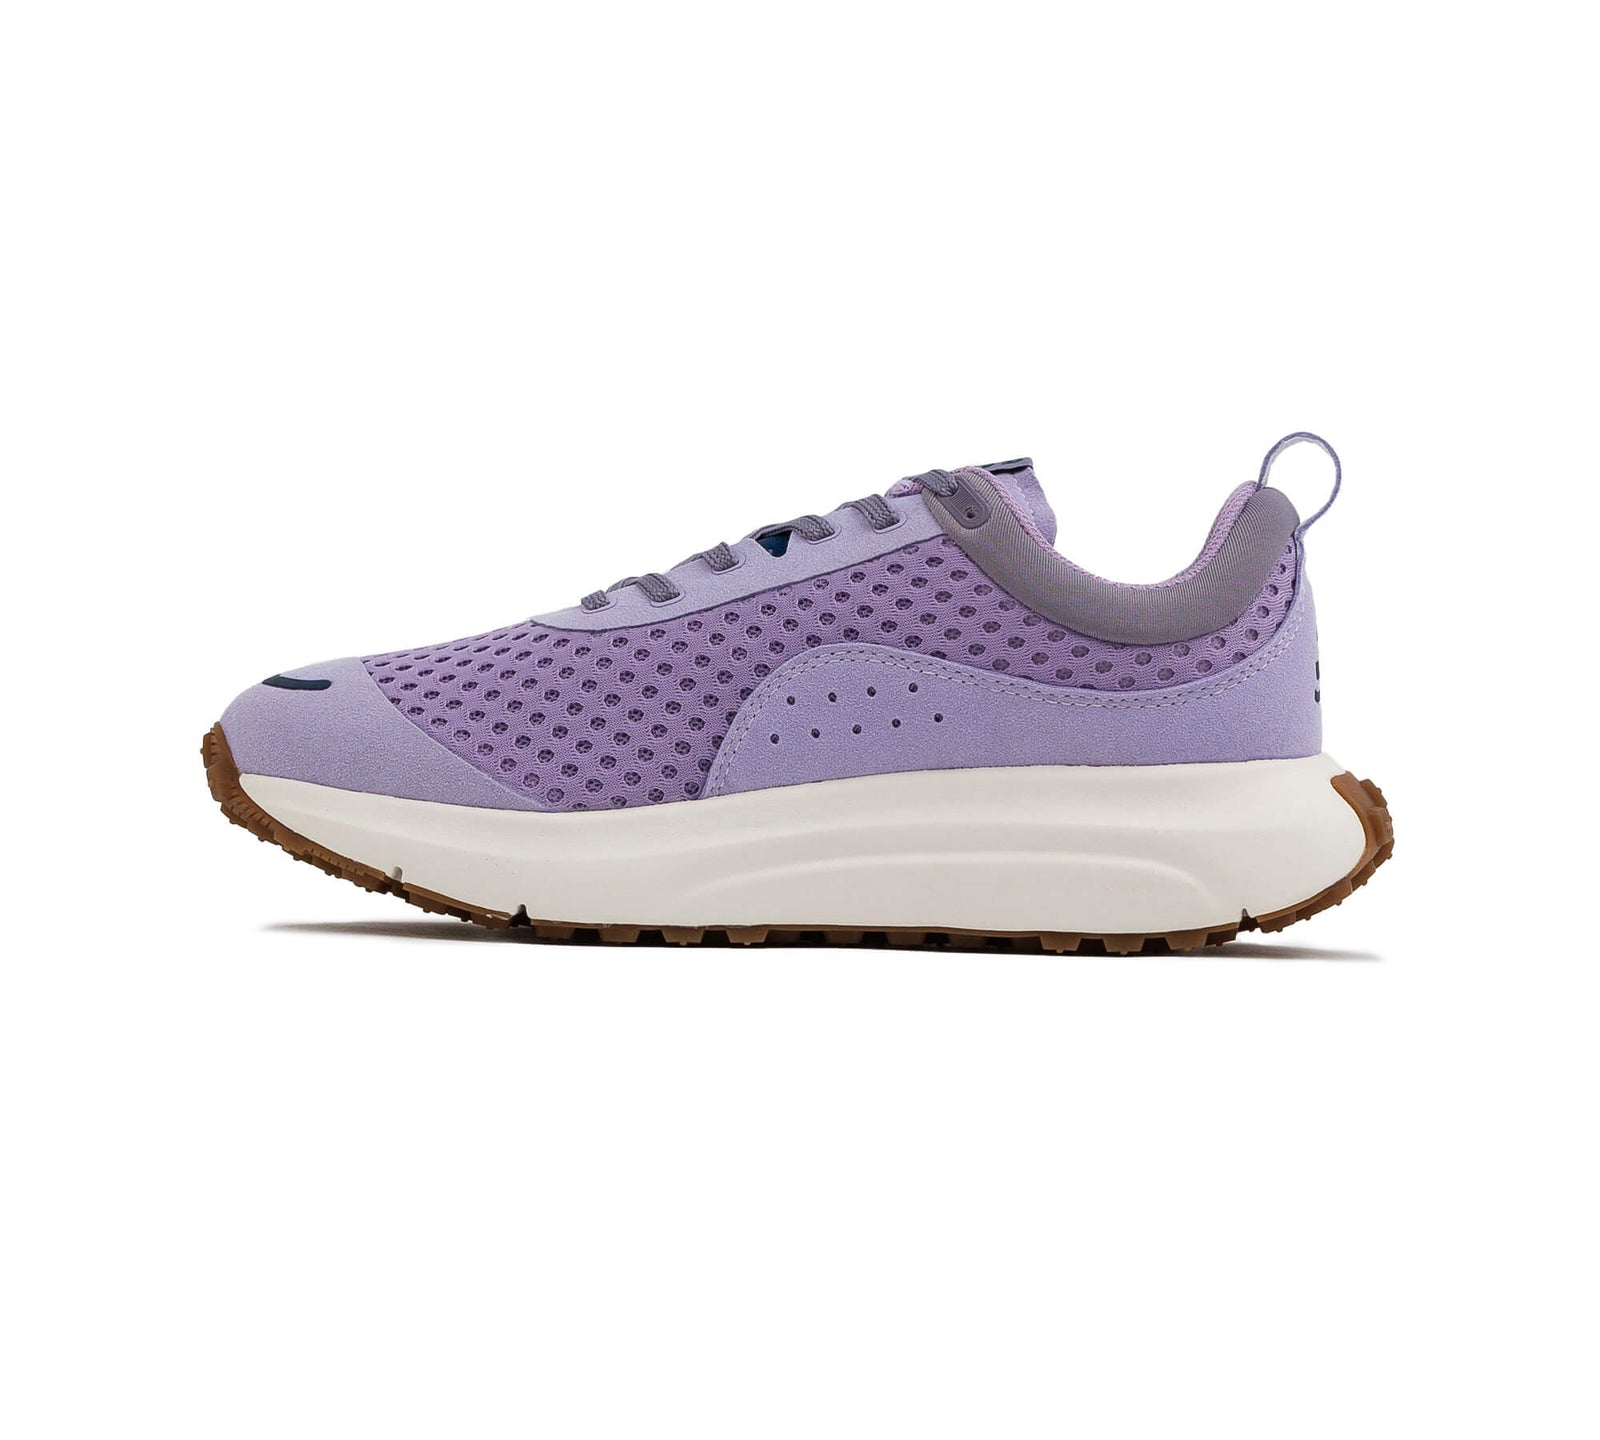 Interior side view of the right Everywhere Hilma Running Shoe in Purple Rose